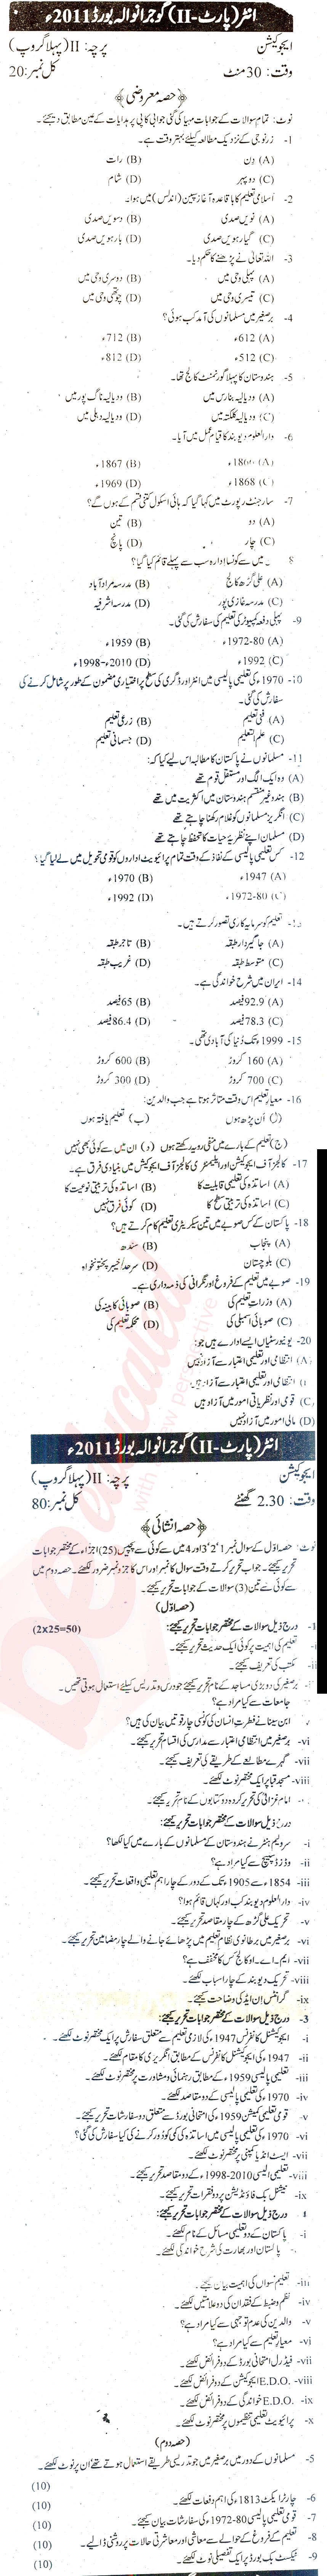 Education FA Part 2 Past Paper Group 1 BISE Gujranwala 2011